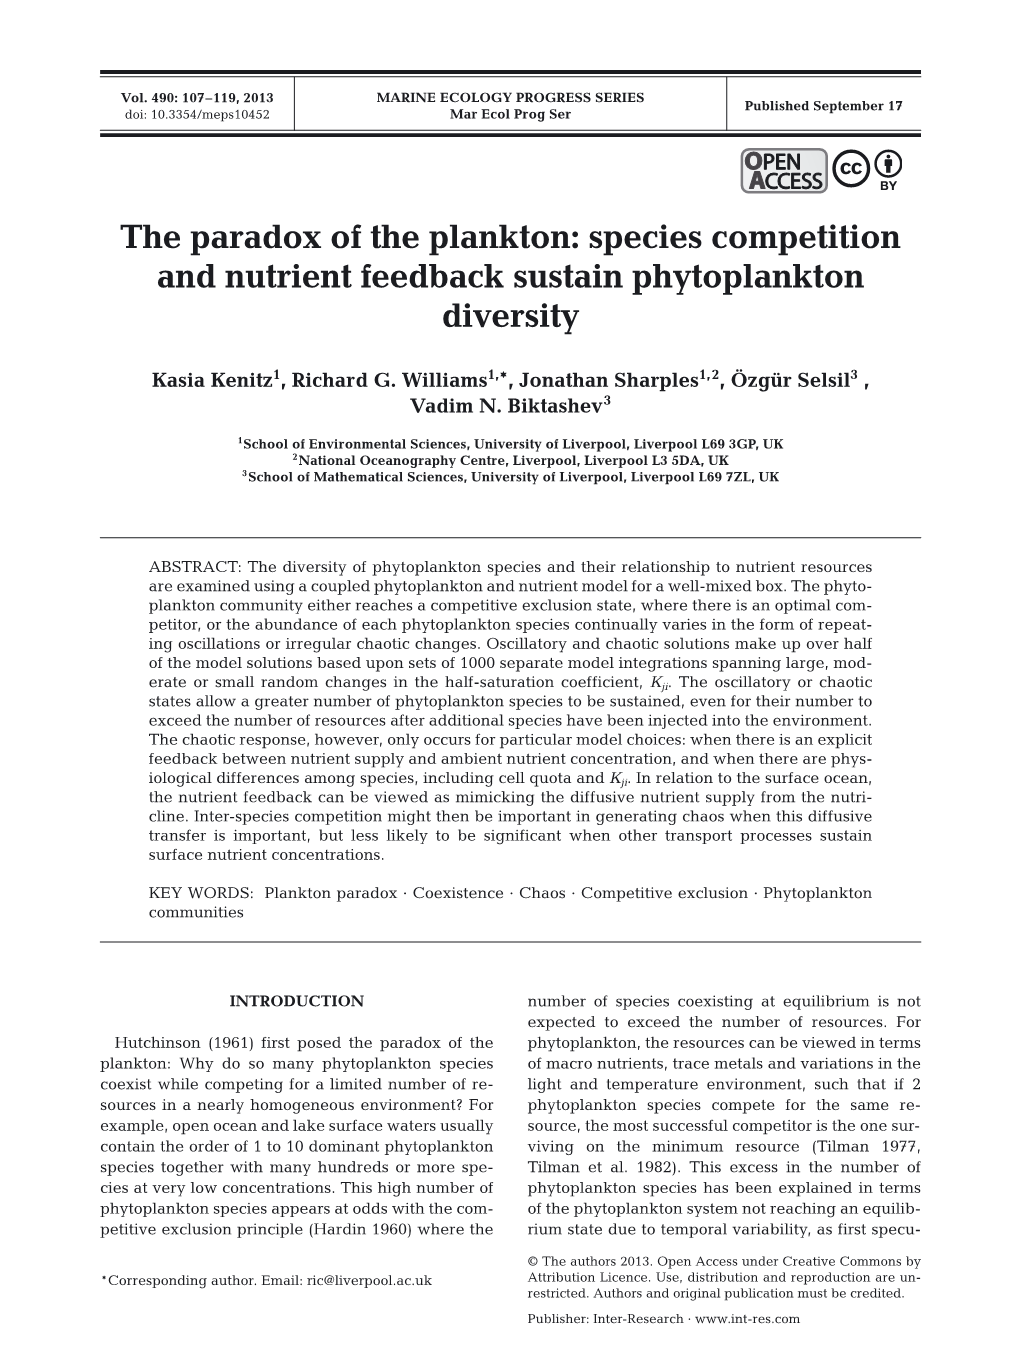 The Paradox of the Plankton: Species Competition and Nutrient Feedback Sustain Phytoplankton Diversity